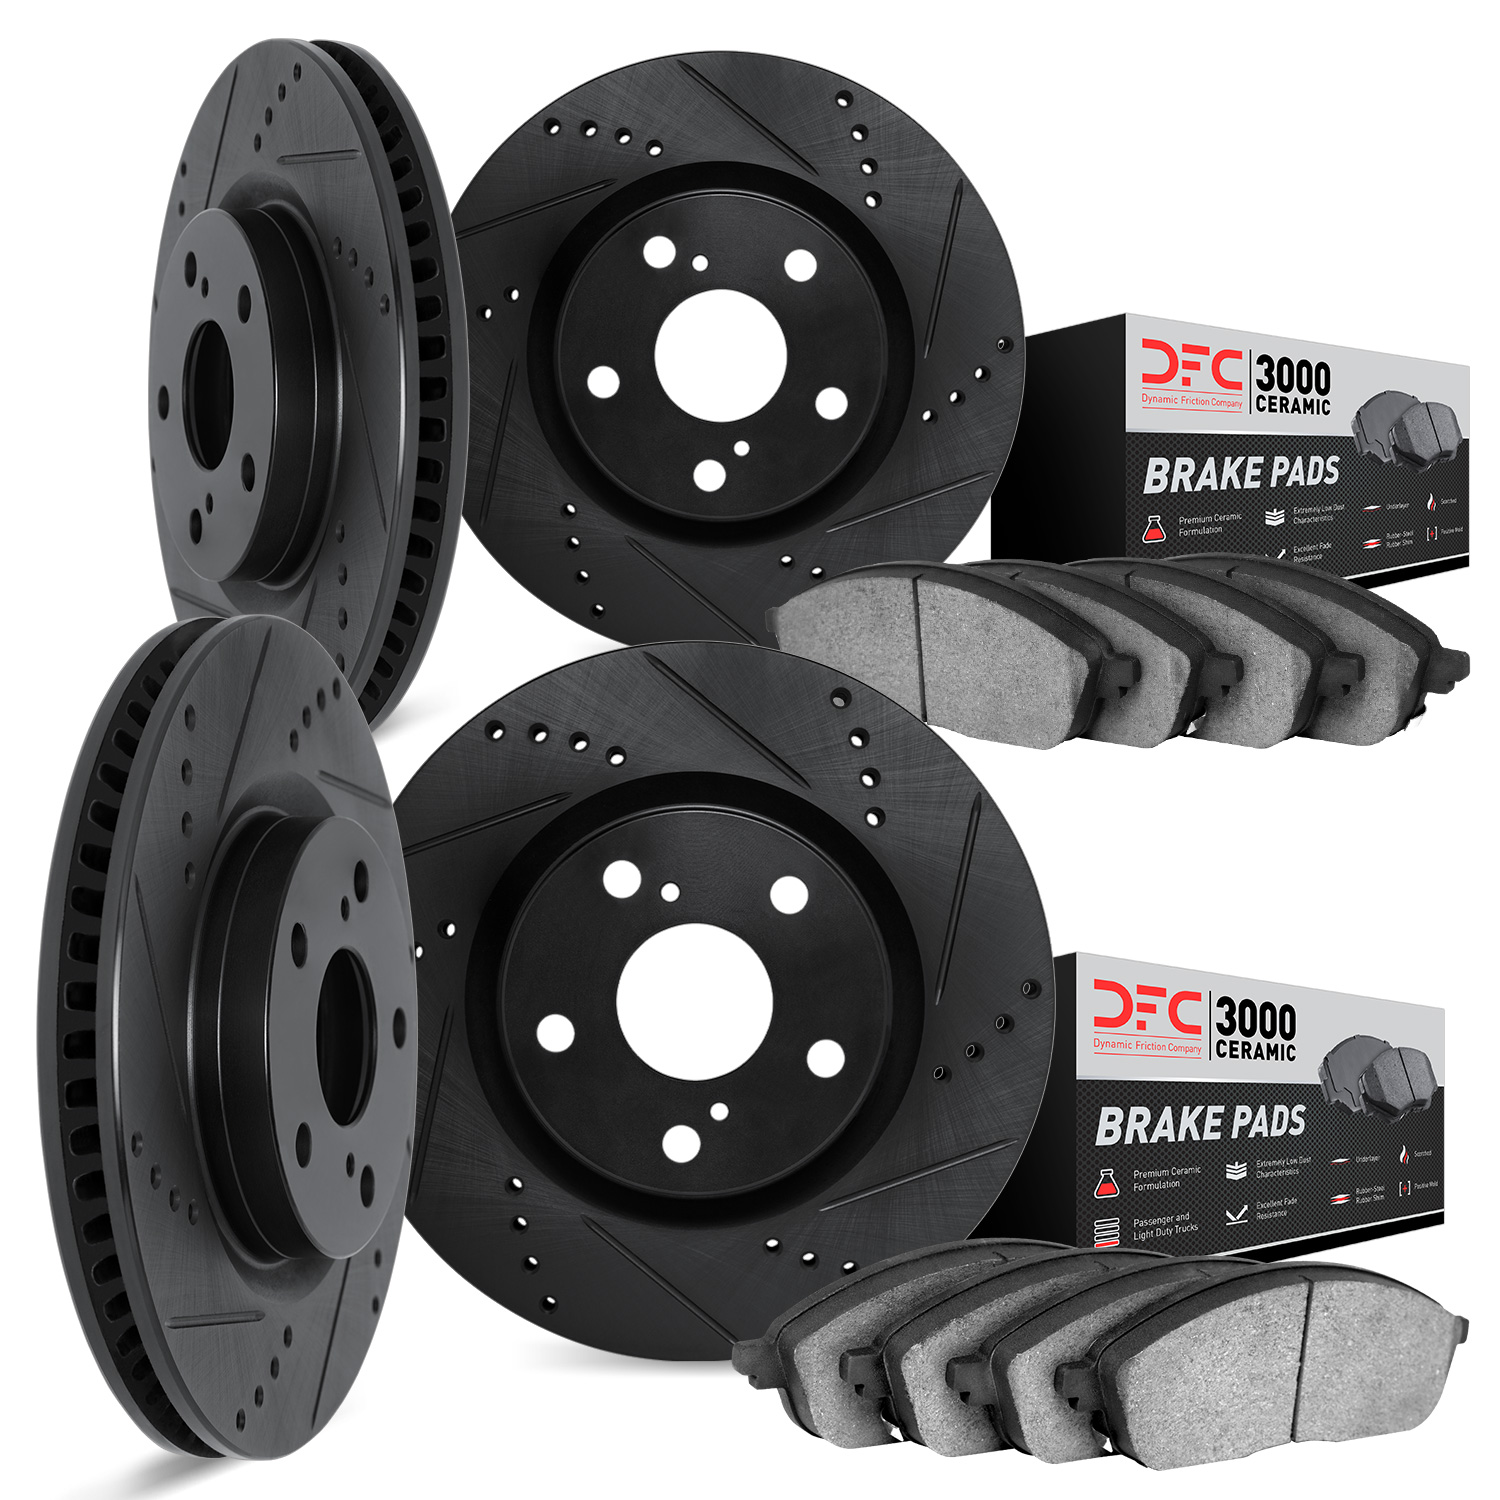 8304-13038 Drilled/Slotted Brake Rotors with 3000-Series Ceramic Brake Pads Kit [Black], 2015-2021 Subaru, Position: Front and R